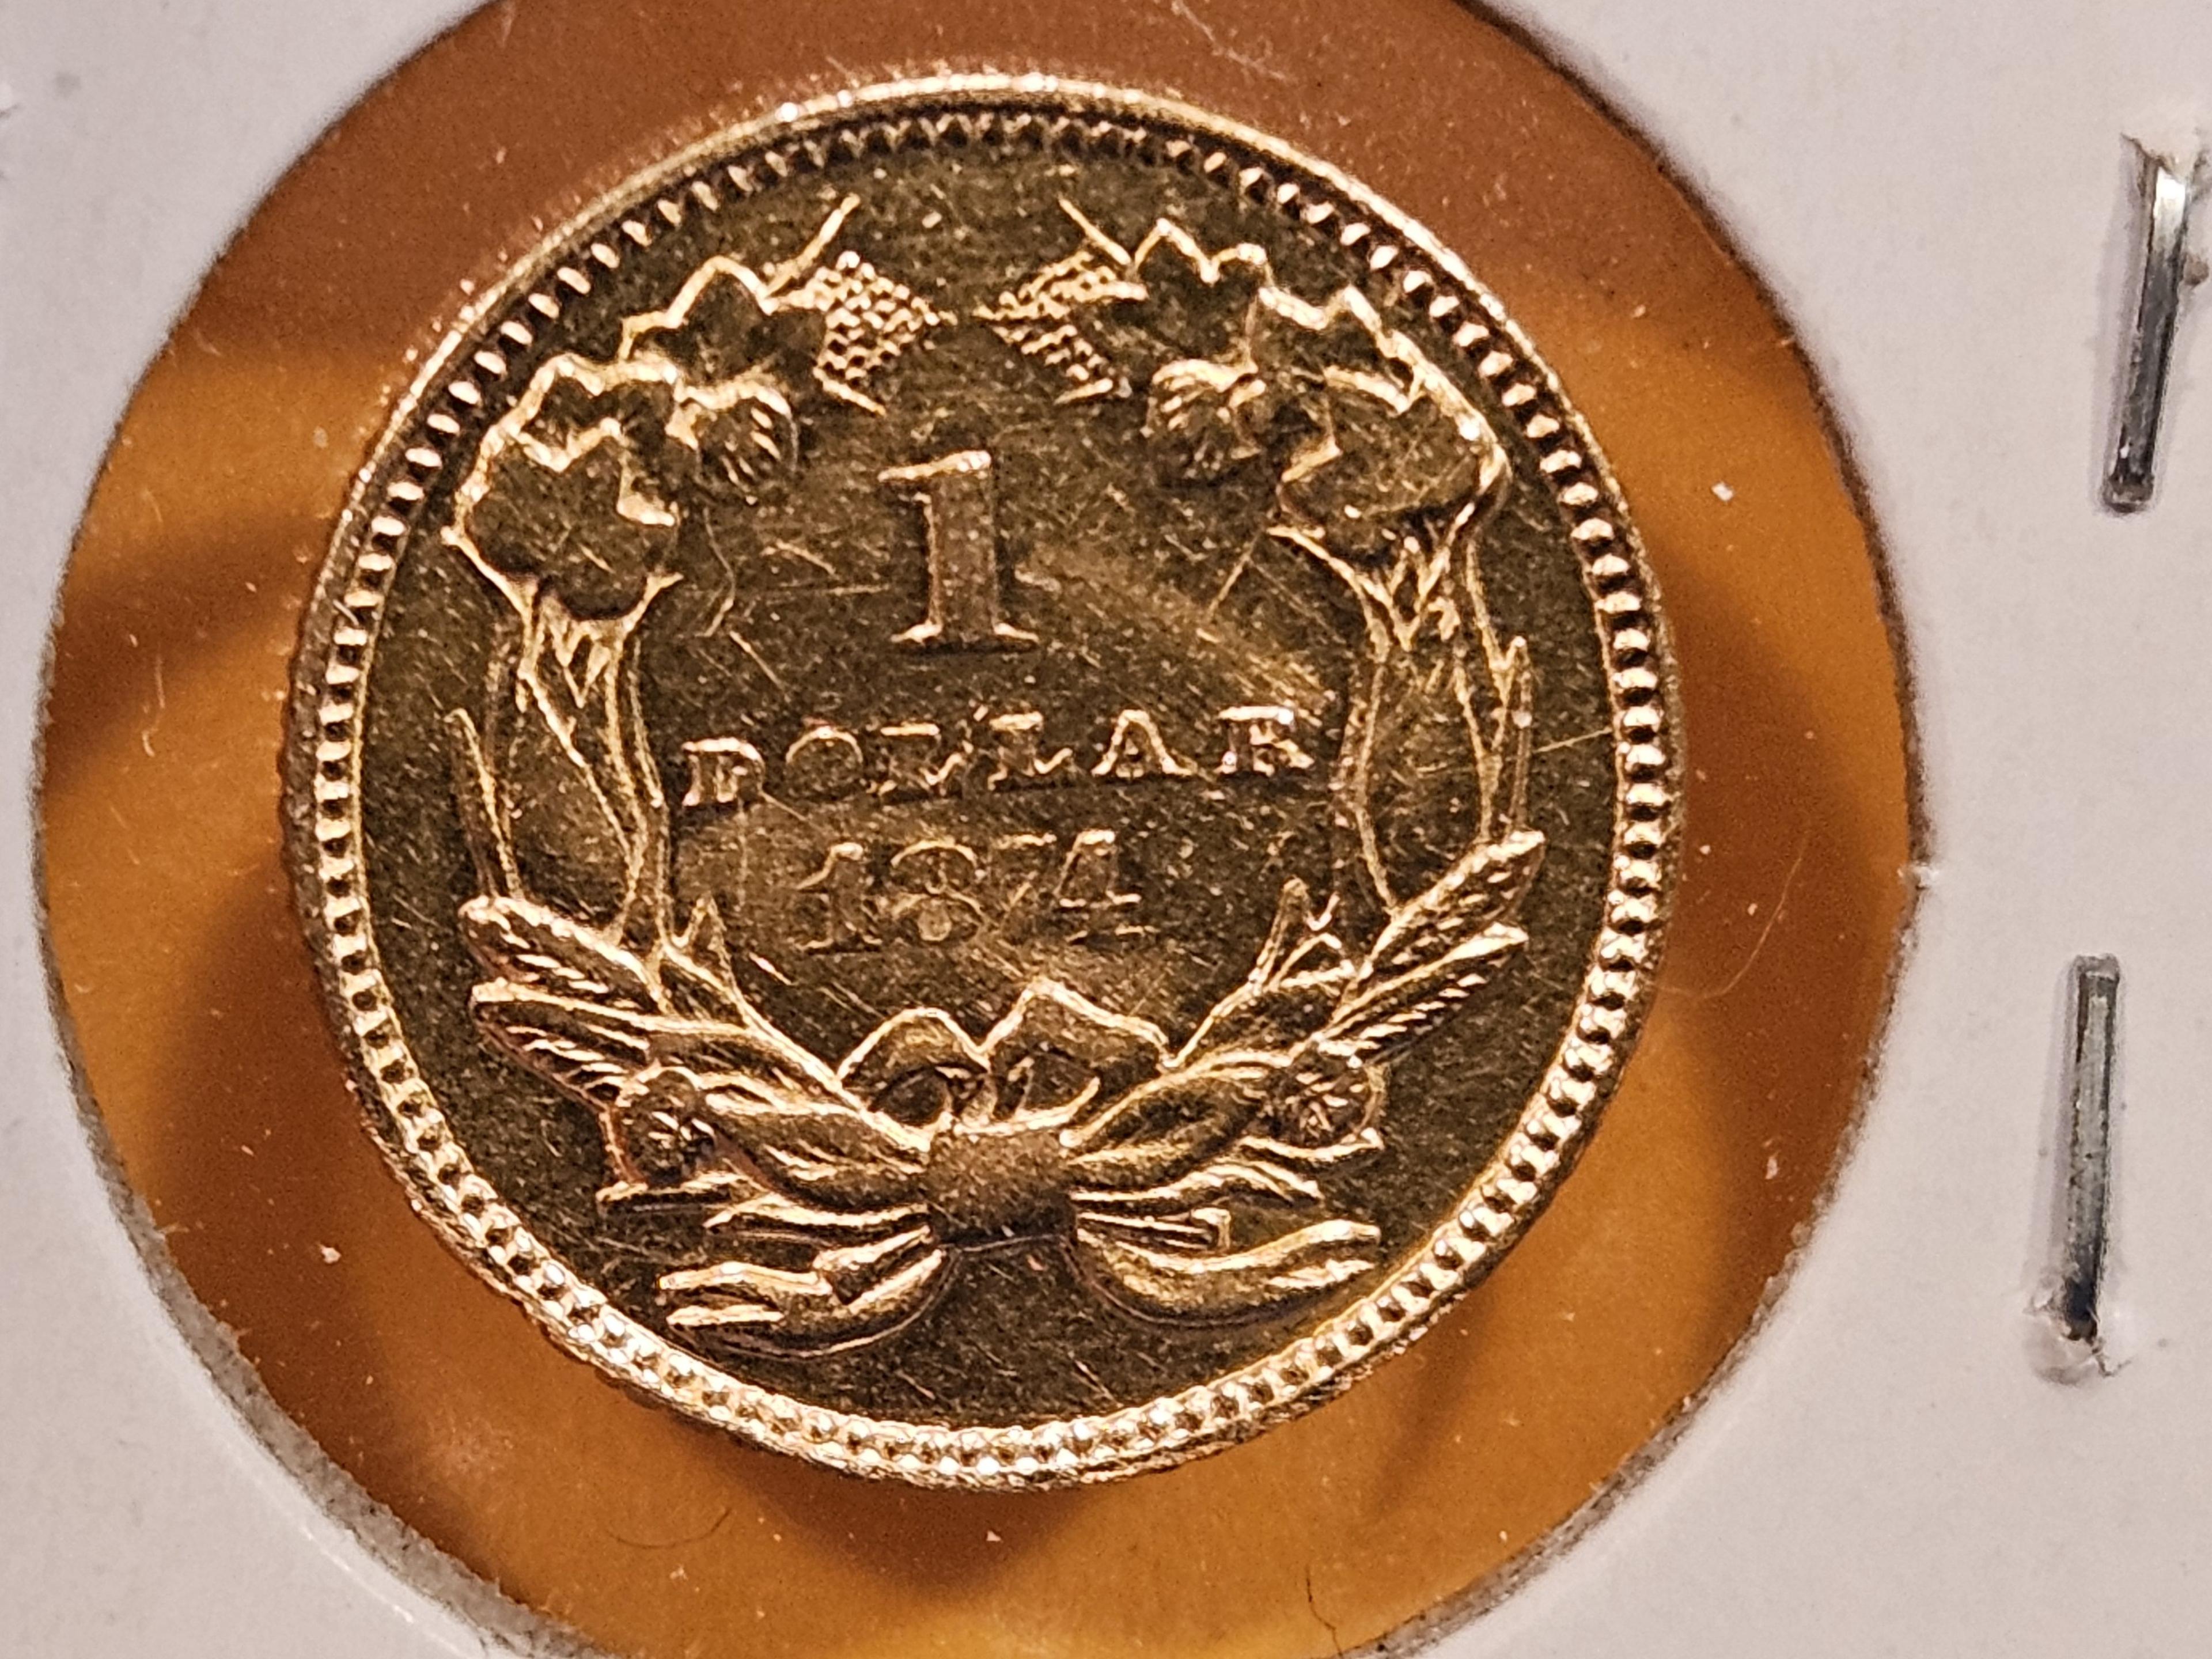 GOLD! Brilliant About Uncirculated -details 1874 Gold Dollar